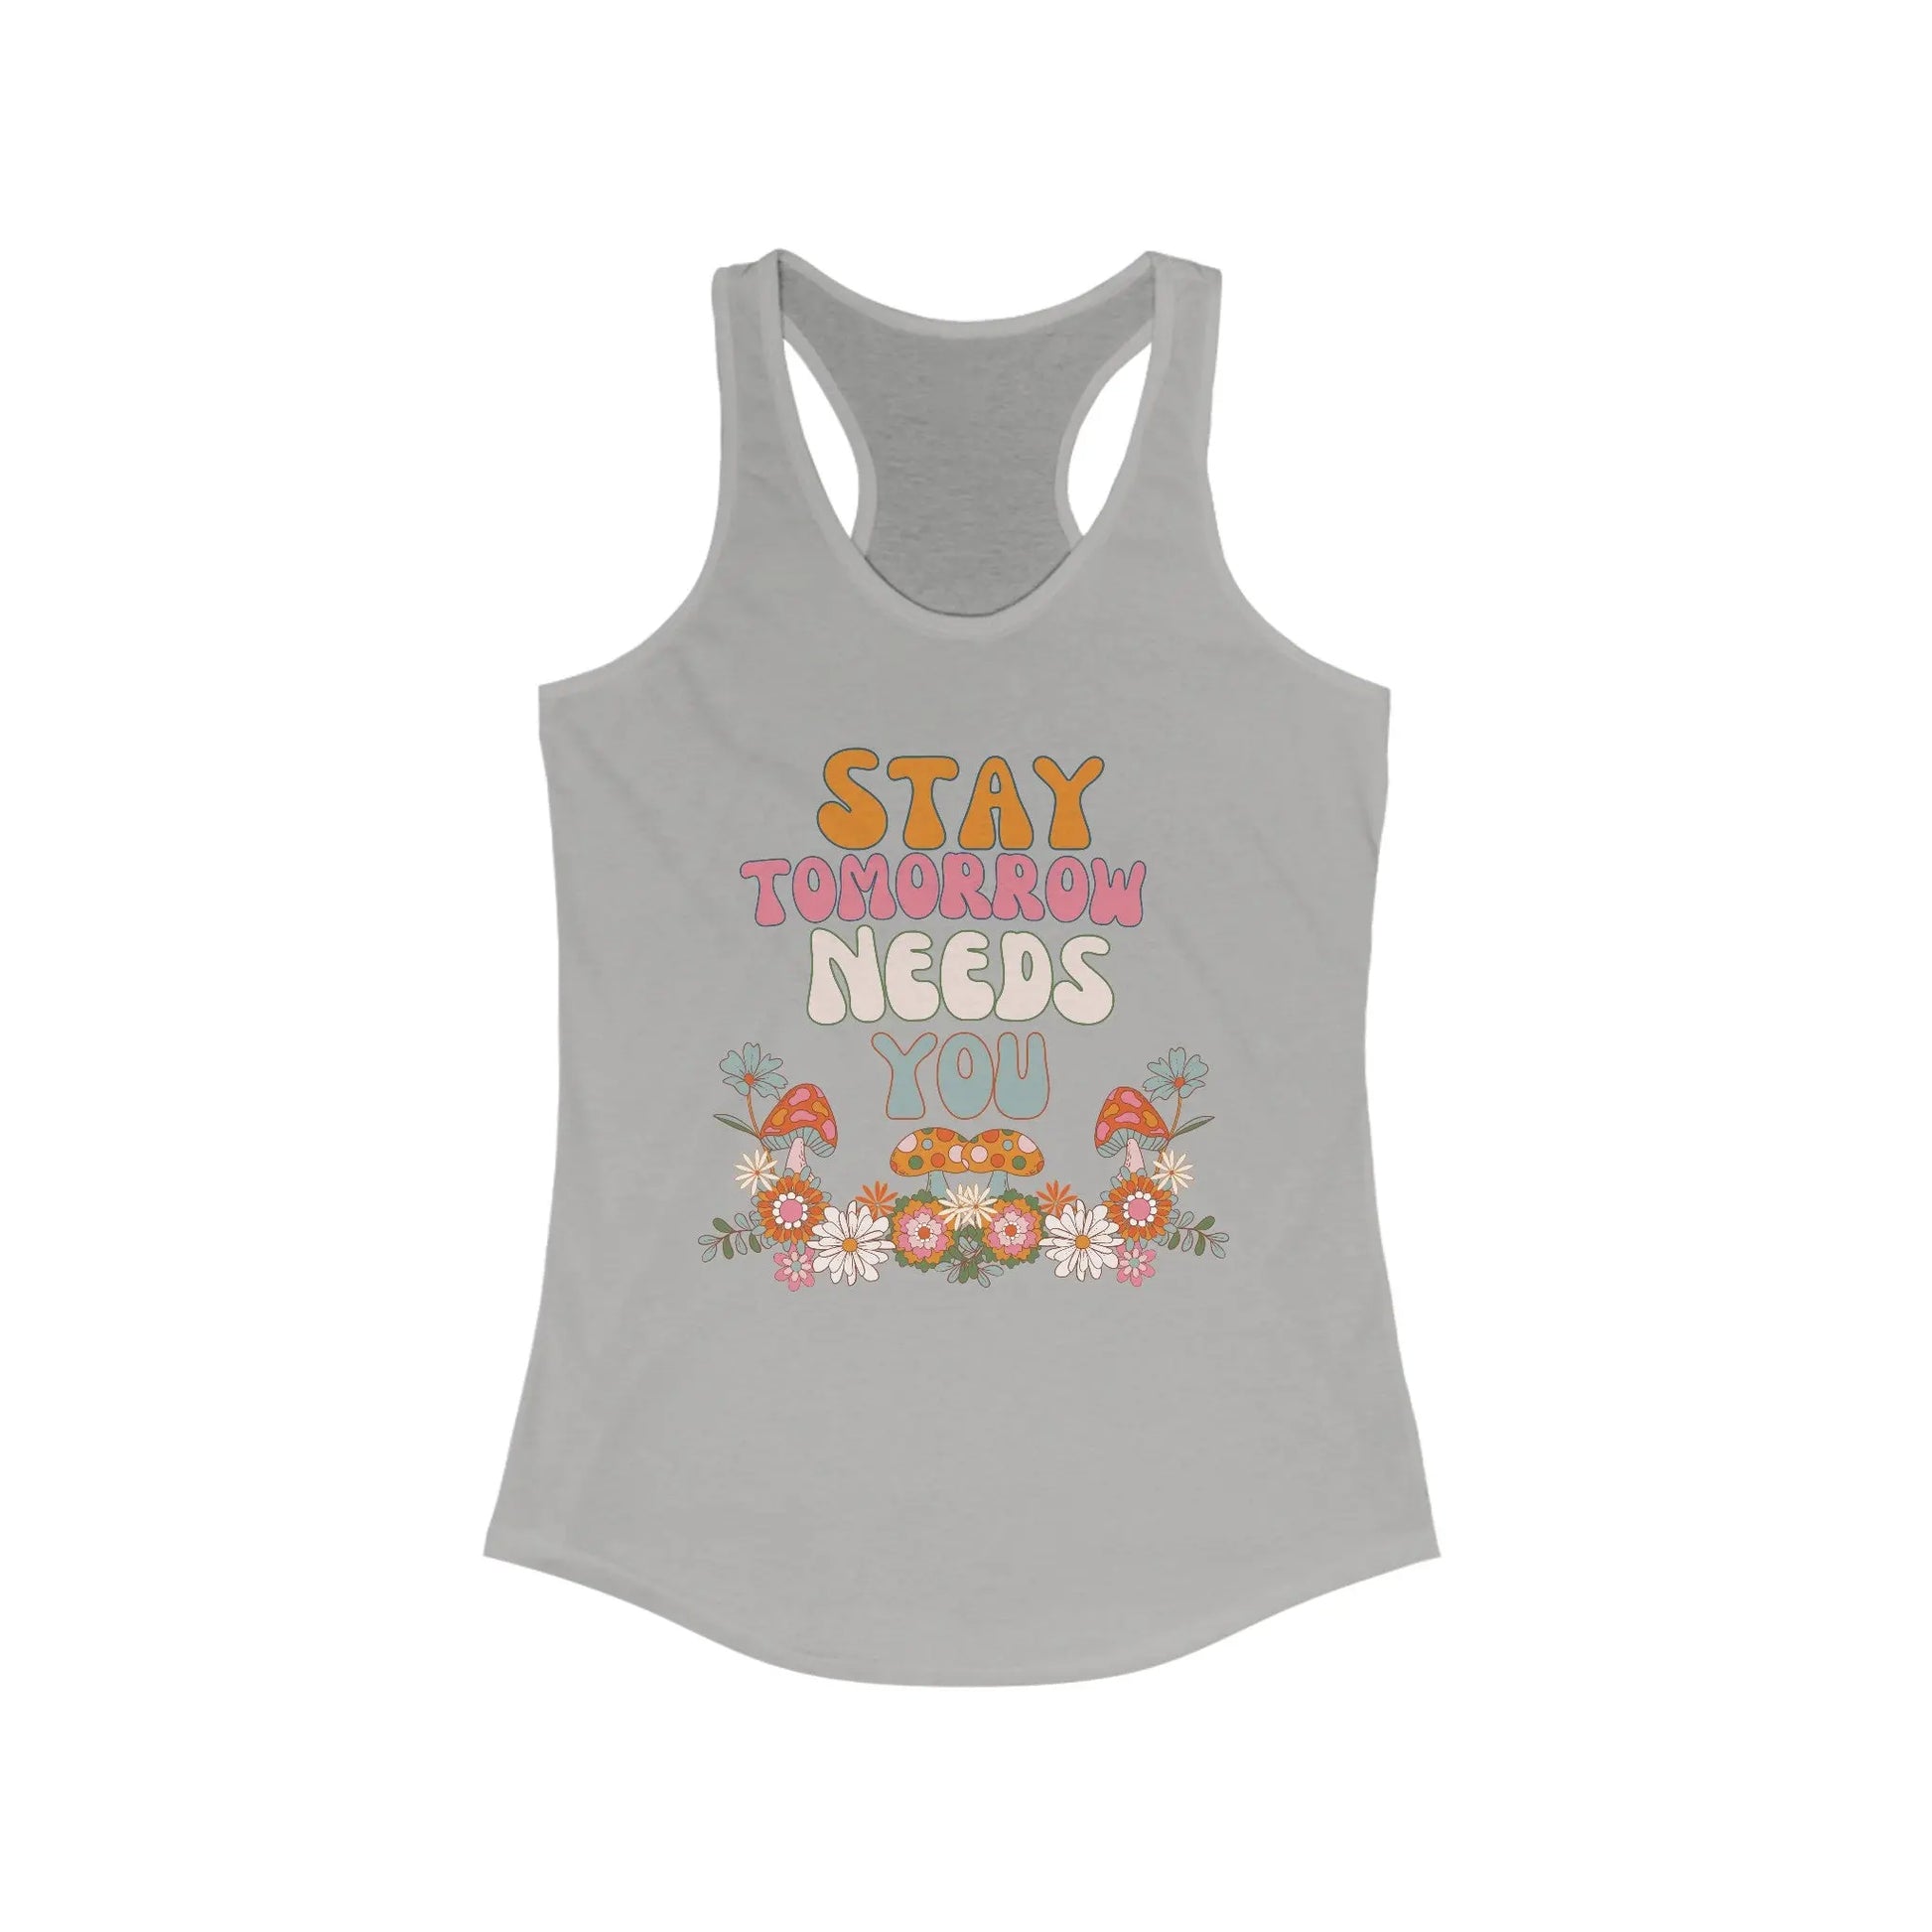 Retro Hippie Boho Summer Stay Tomorrow Needs You Mental Health Awareness Summer Top  Beach Pool Racerback Tank Top Suicide Prevention Gift Veterans Support Military Gift - Stay Tomorrow Needs You Retro Hippie Boho Summer Stay Tomorrow Needs You Mental Health Awareness Summer Top  Beach Pool Racerback Tank Top Suicide Prevention Gift Veterans Support Military Gift